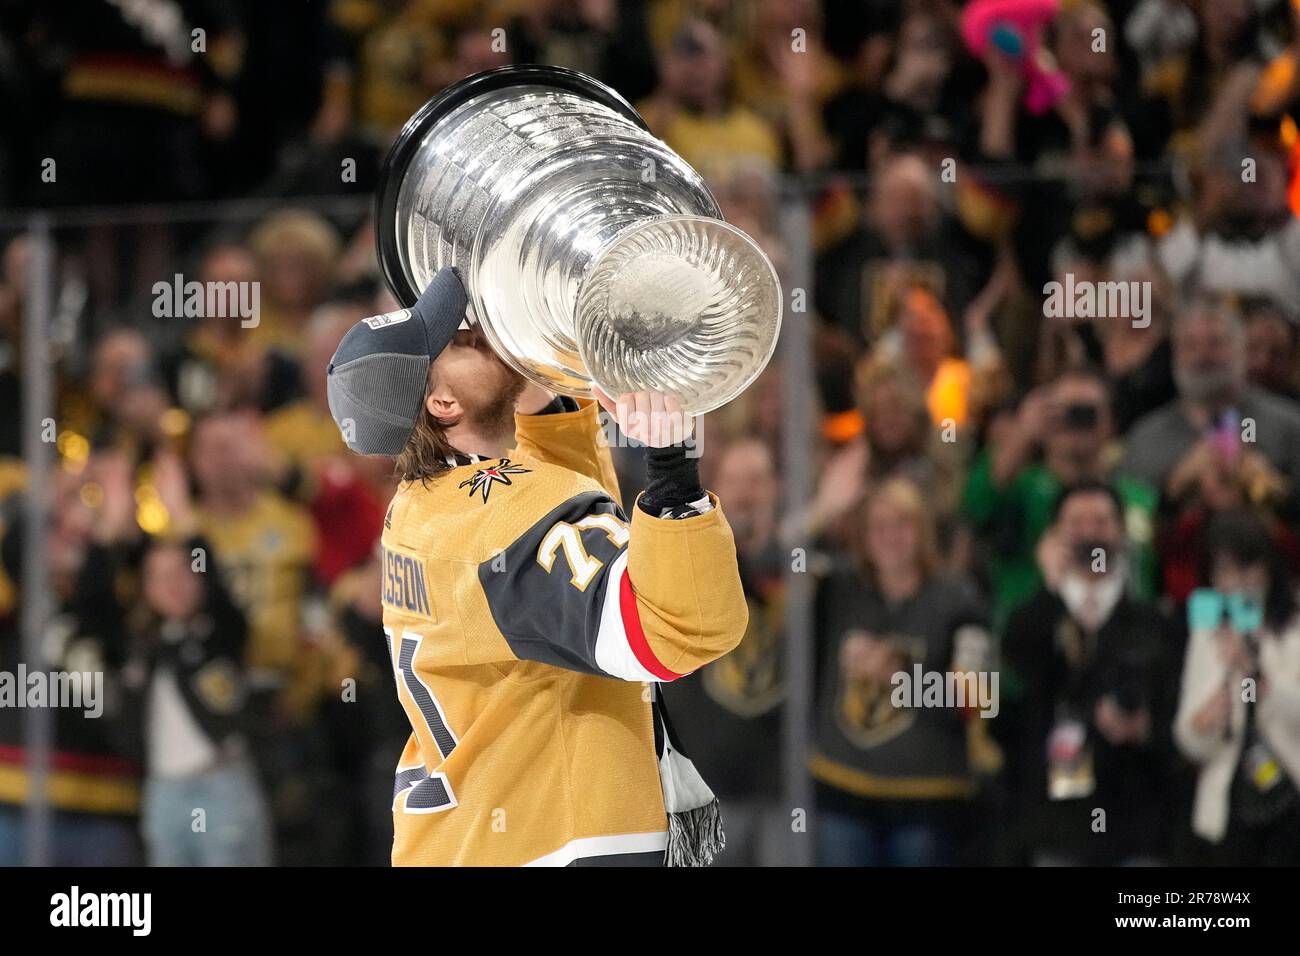 The Rise of the Stanley Cup – The Knight Times